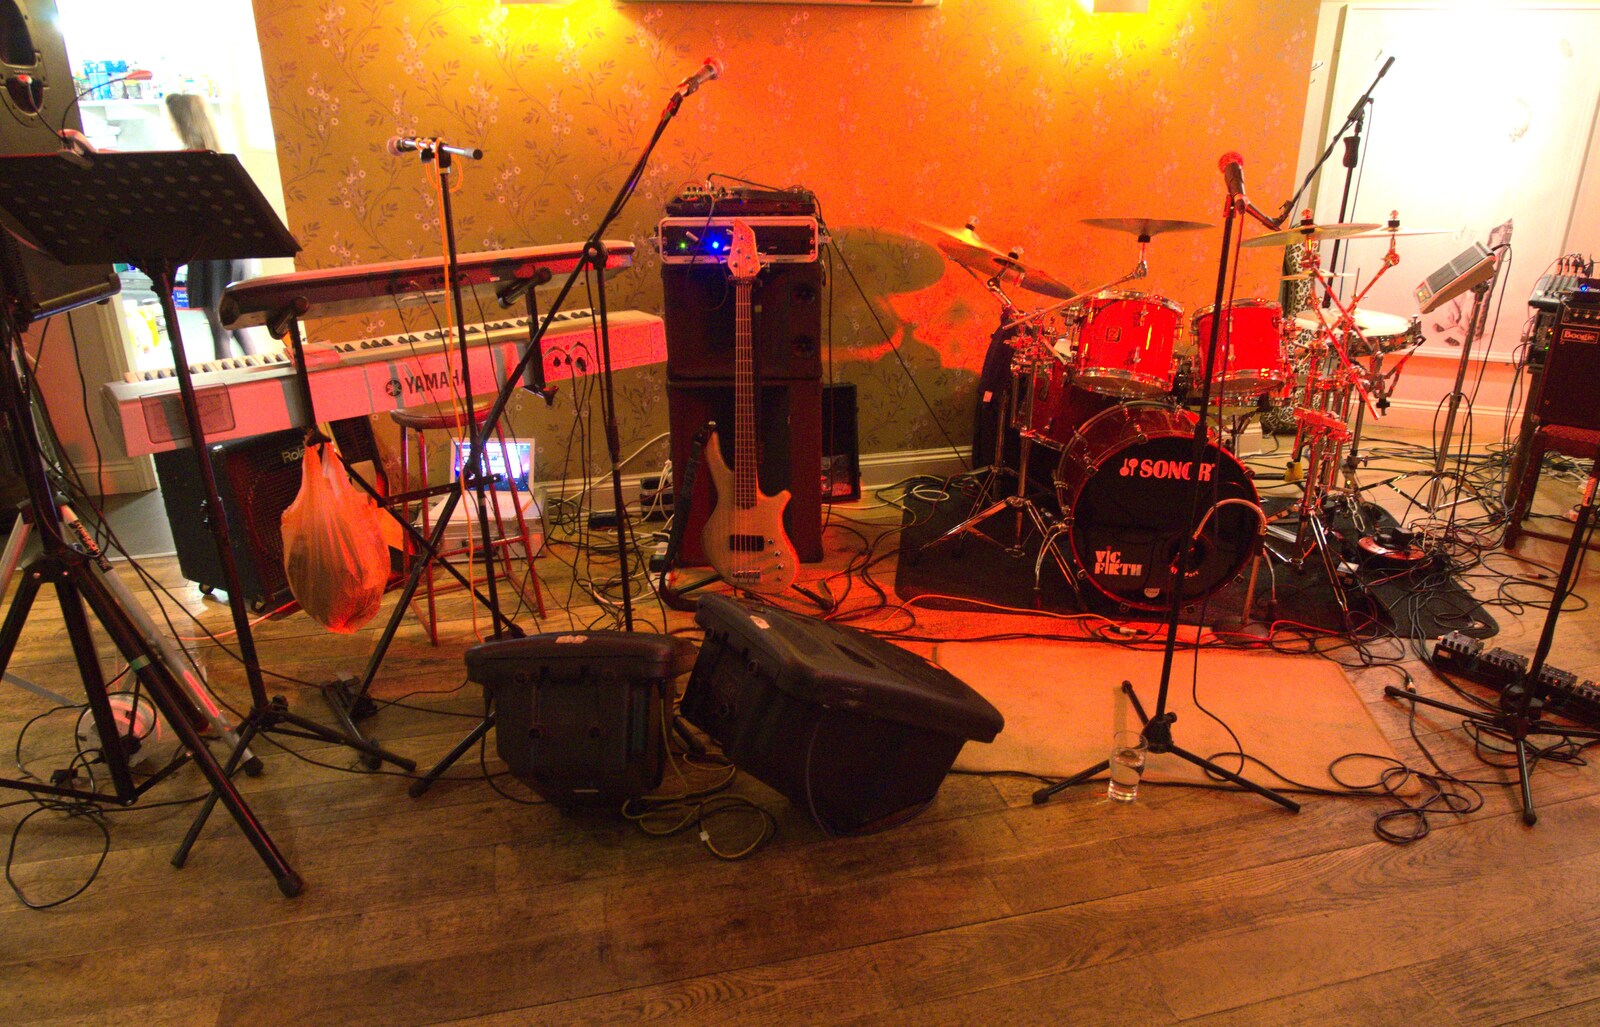 The band's gear is set up and ready to go from The BBs do New Year's Eve at the George and Dragon, East Harling, Norfolk - 31st December 2011